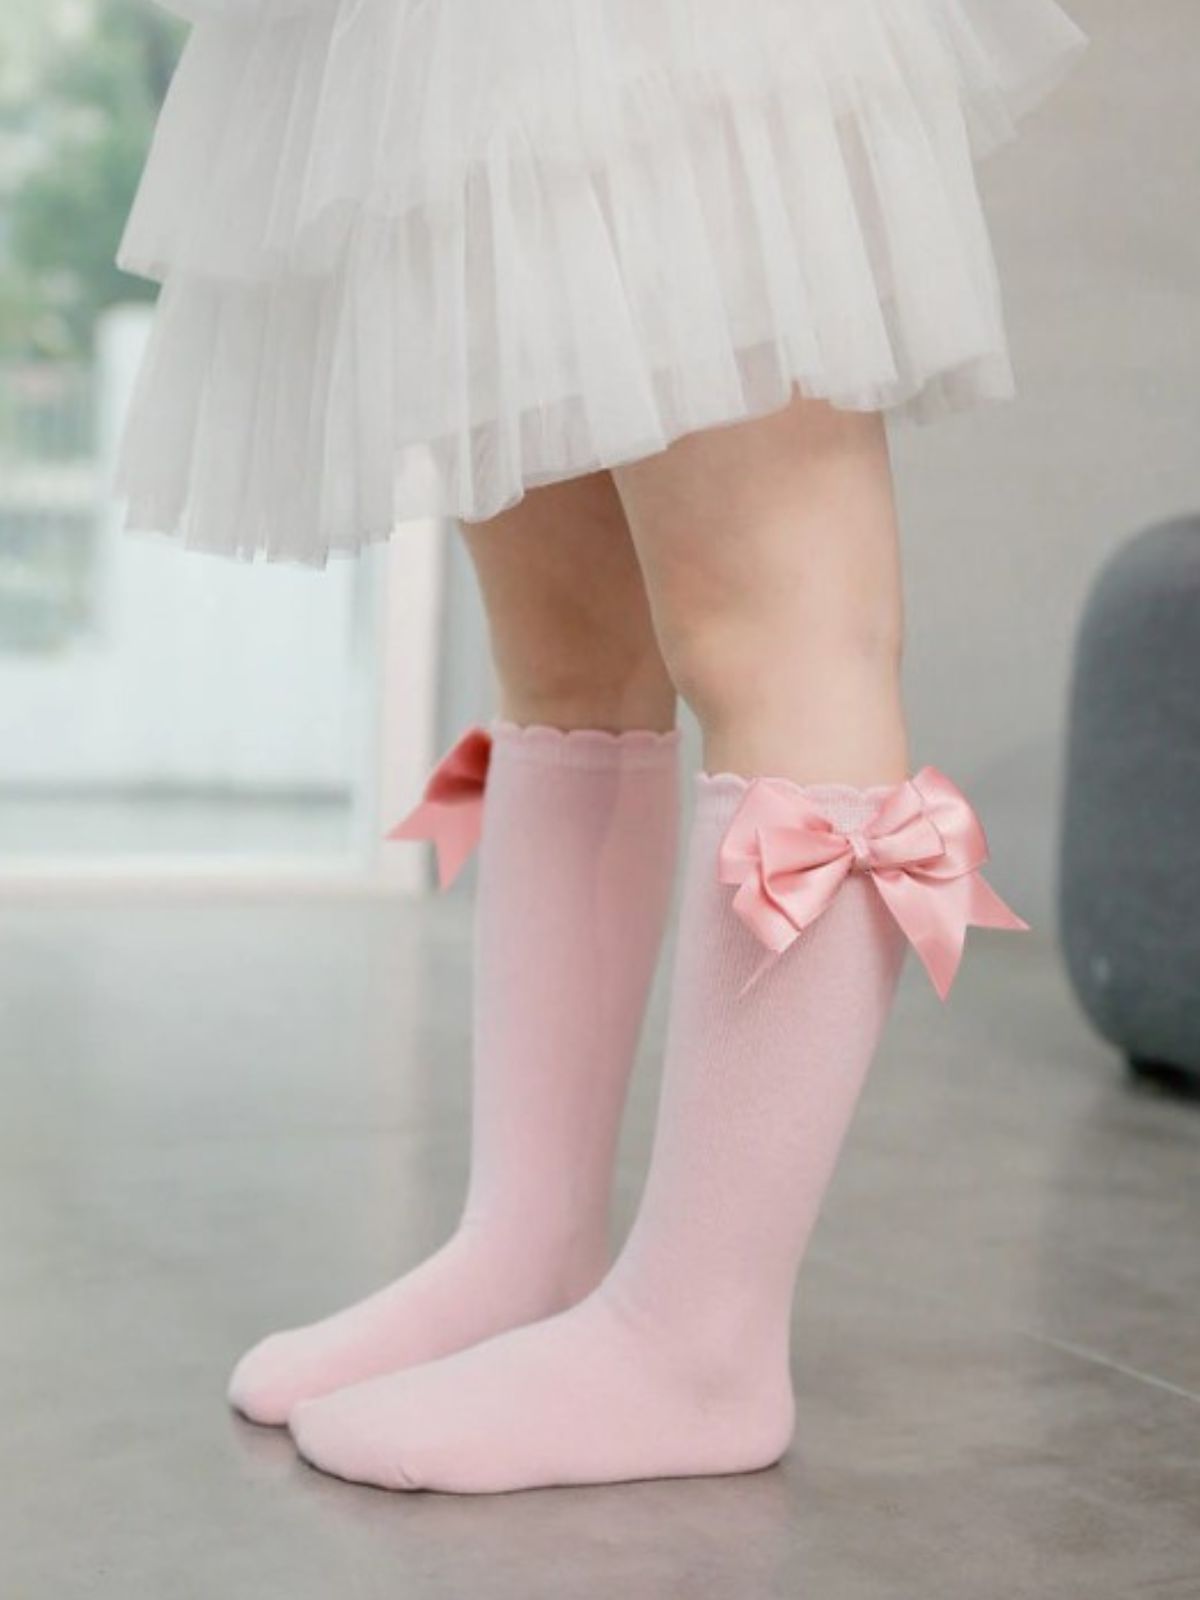 All Dolled Up Silky Bow Knee-High Socks